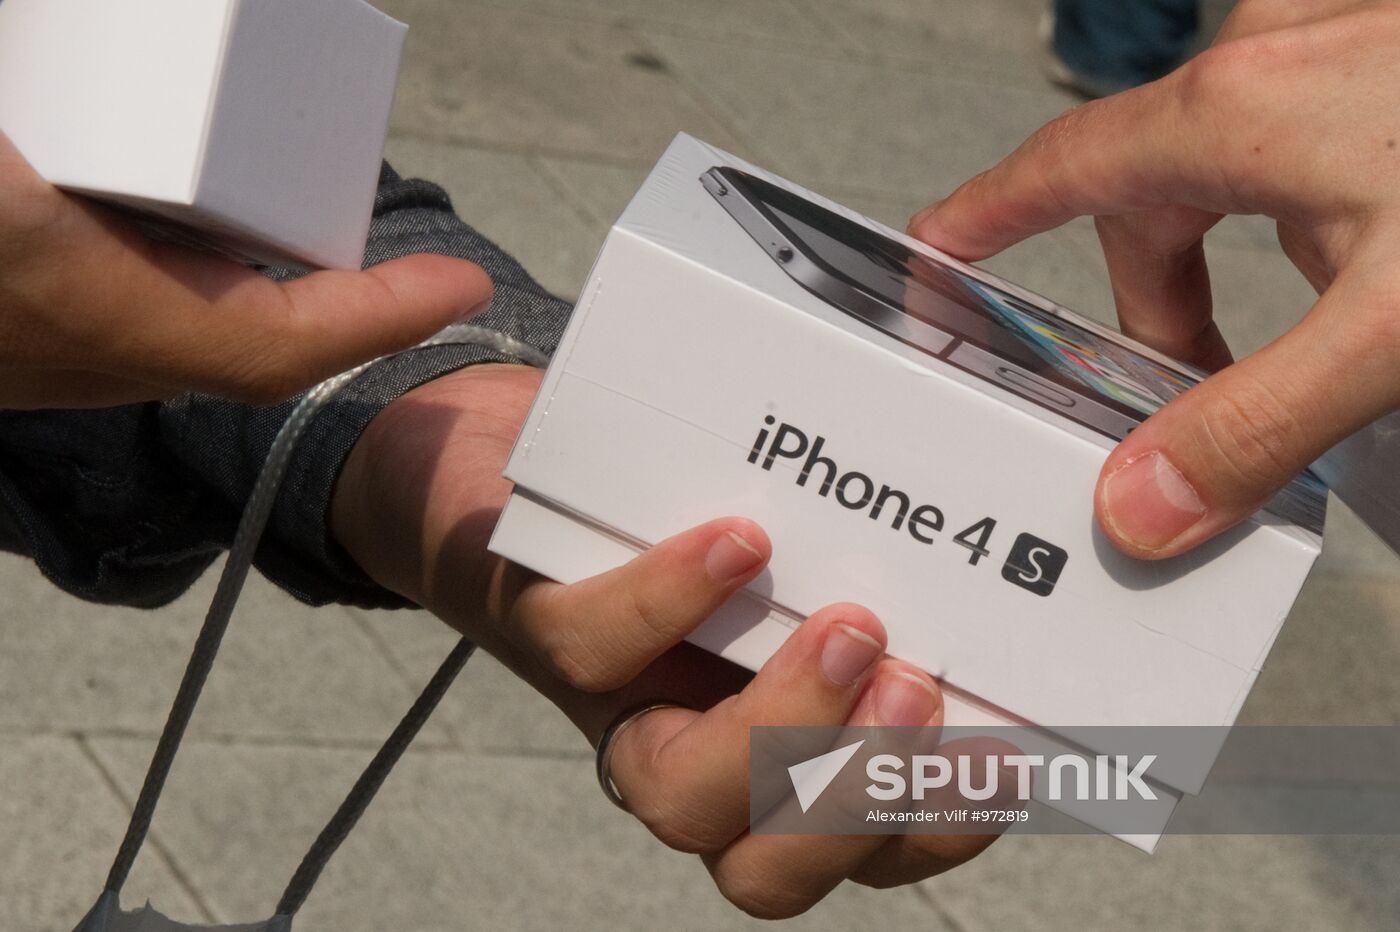 iPhone 4S goes on sale